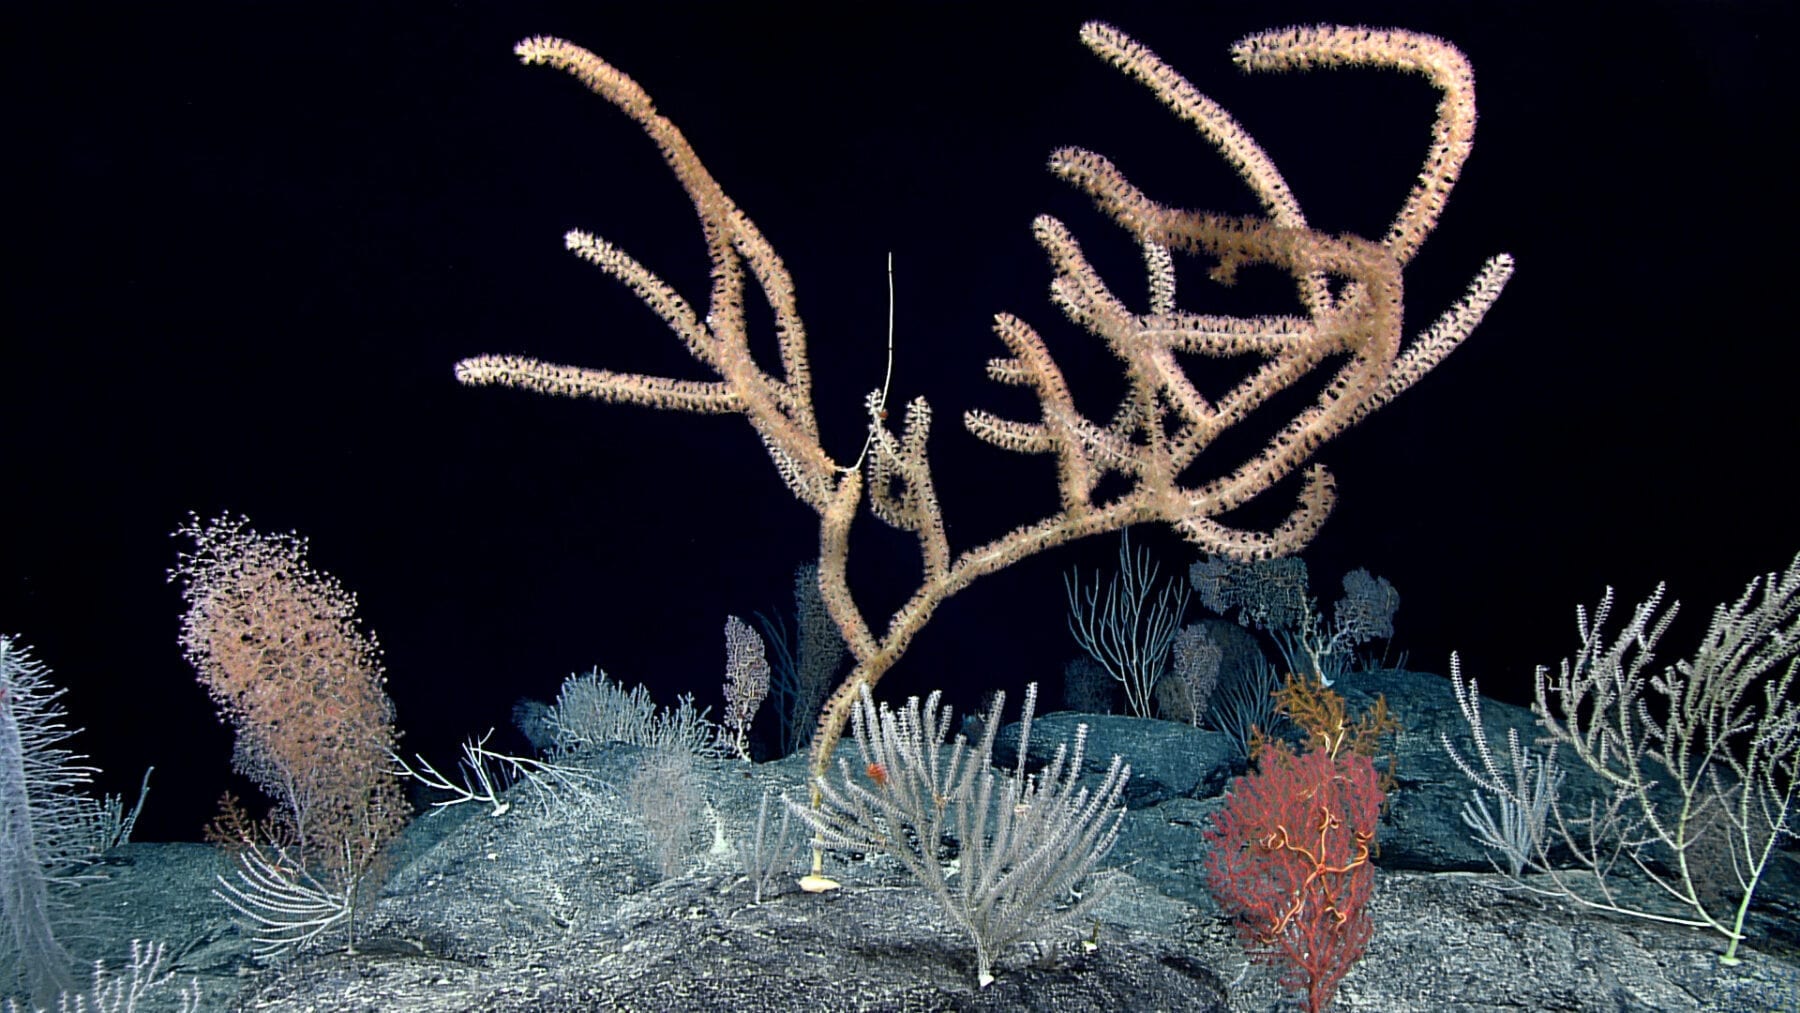 A diverse, dense coral community was present throughout the dive at Debussy Seamount. Several colonies were very large, indicating a stable environment for many years. Credit: NOAA OER